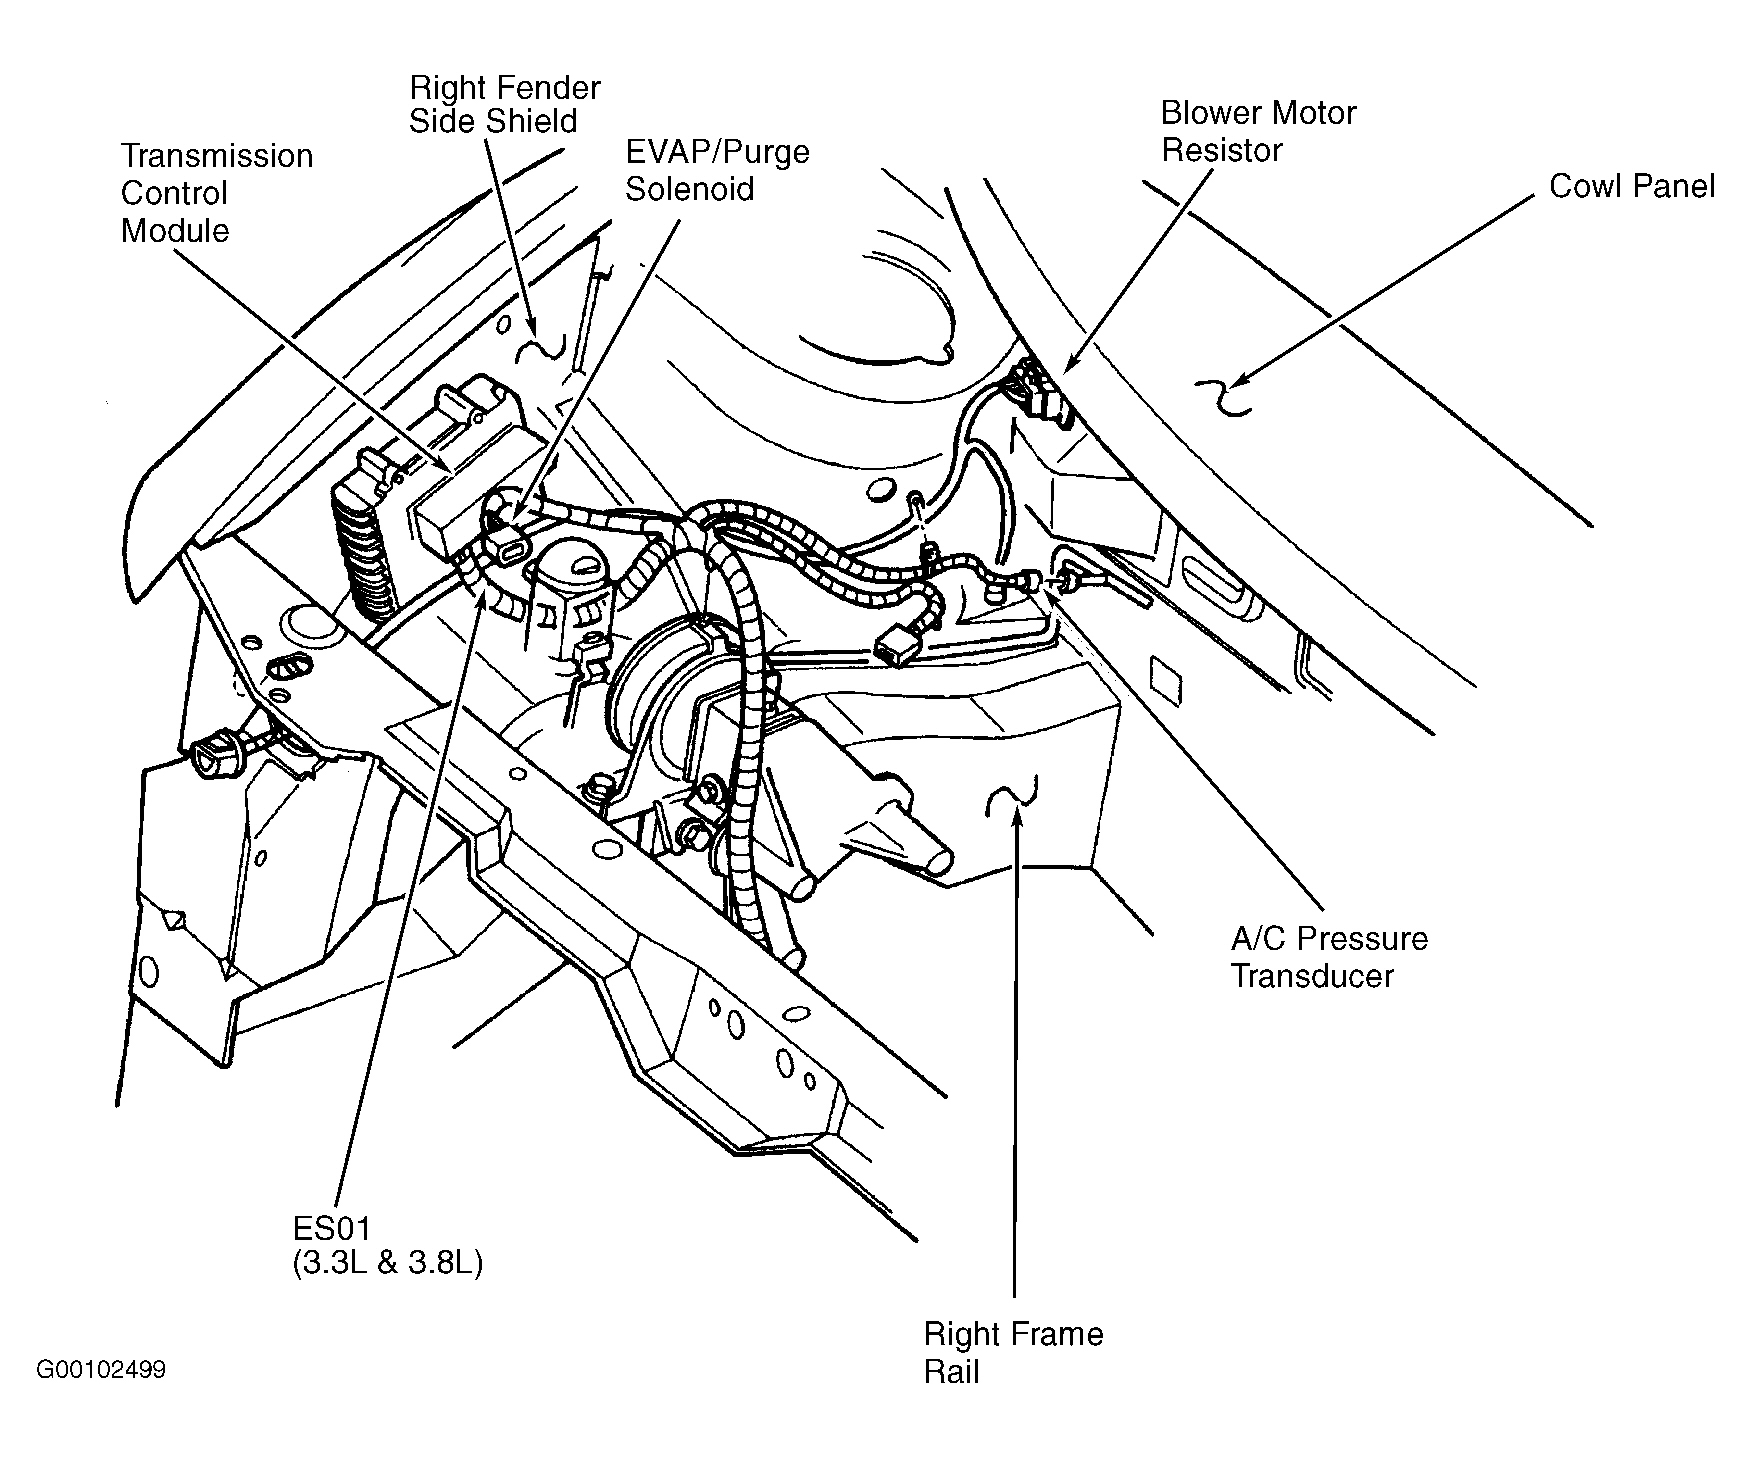 Dodge Caravan LE 1996 - Component Locations -  Right Side Of Engine Compartment